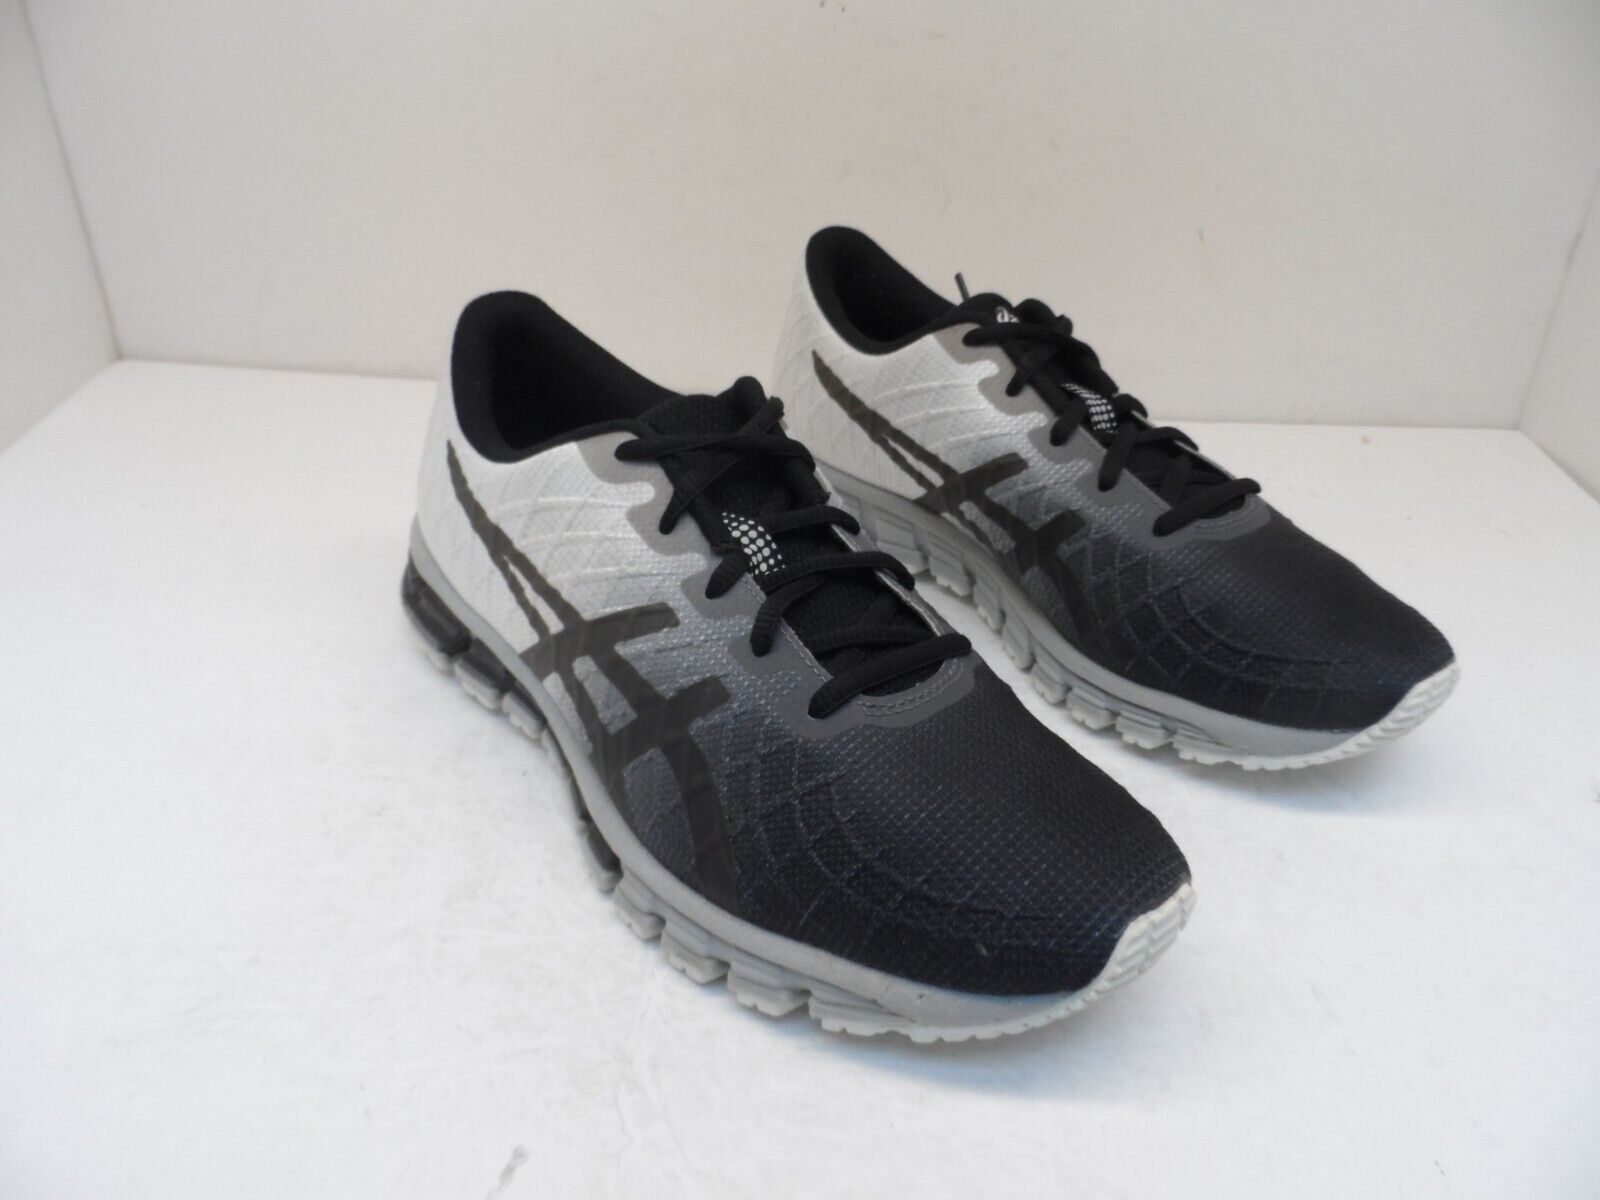 Primary image for Asics Women's 1022A098 Gel-Quantum  180 4 Running Shoe Black Gray Size 8.5M